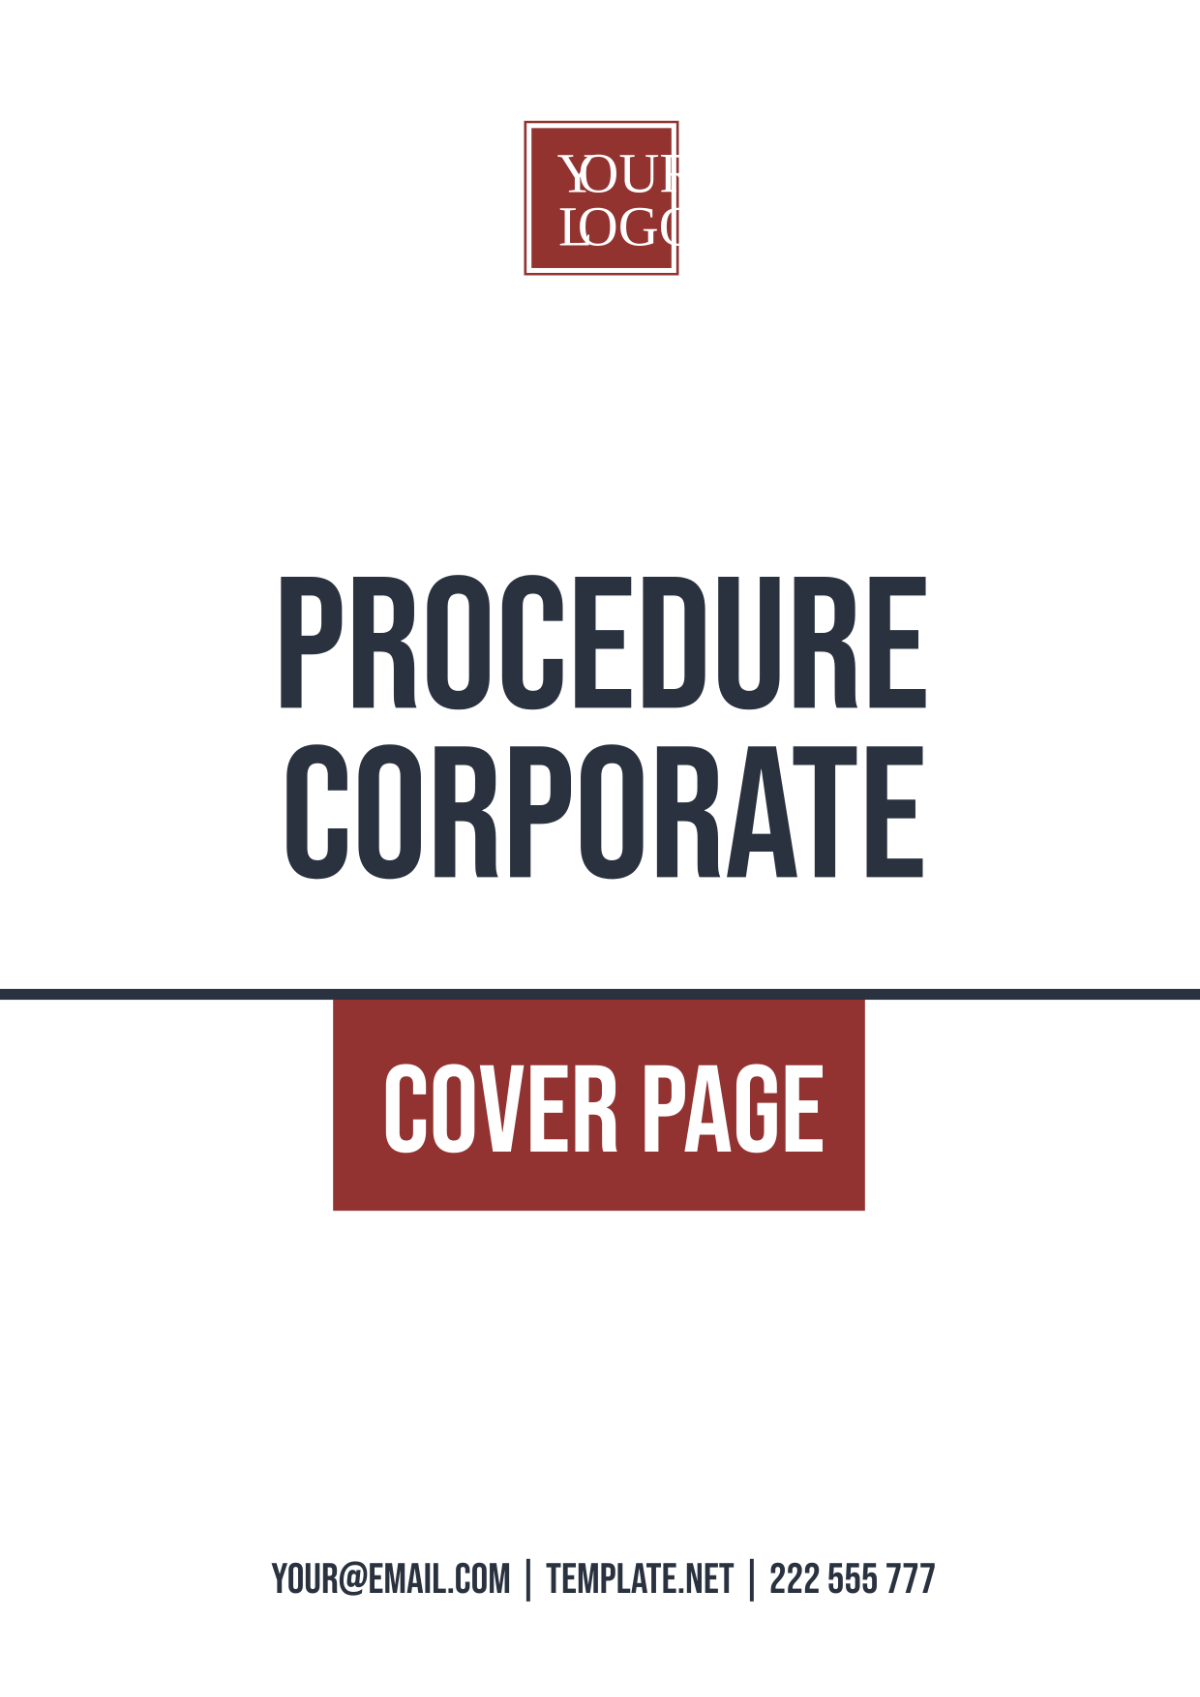 Procedure Corporate Cover Page